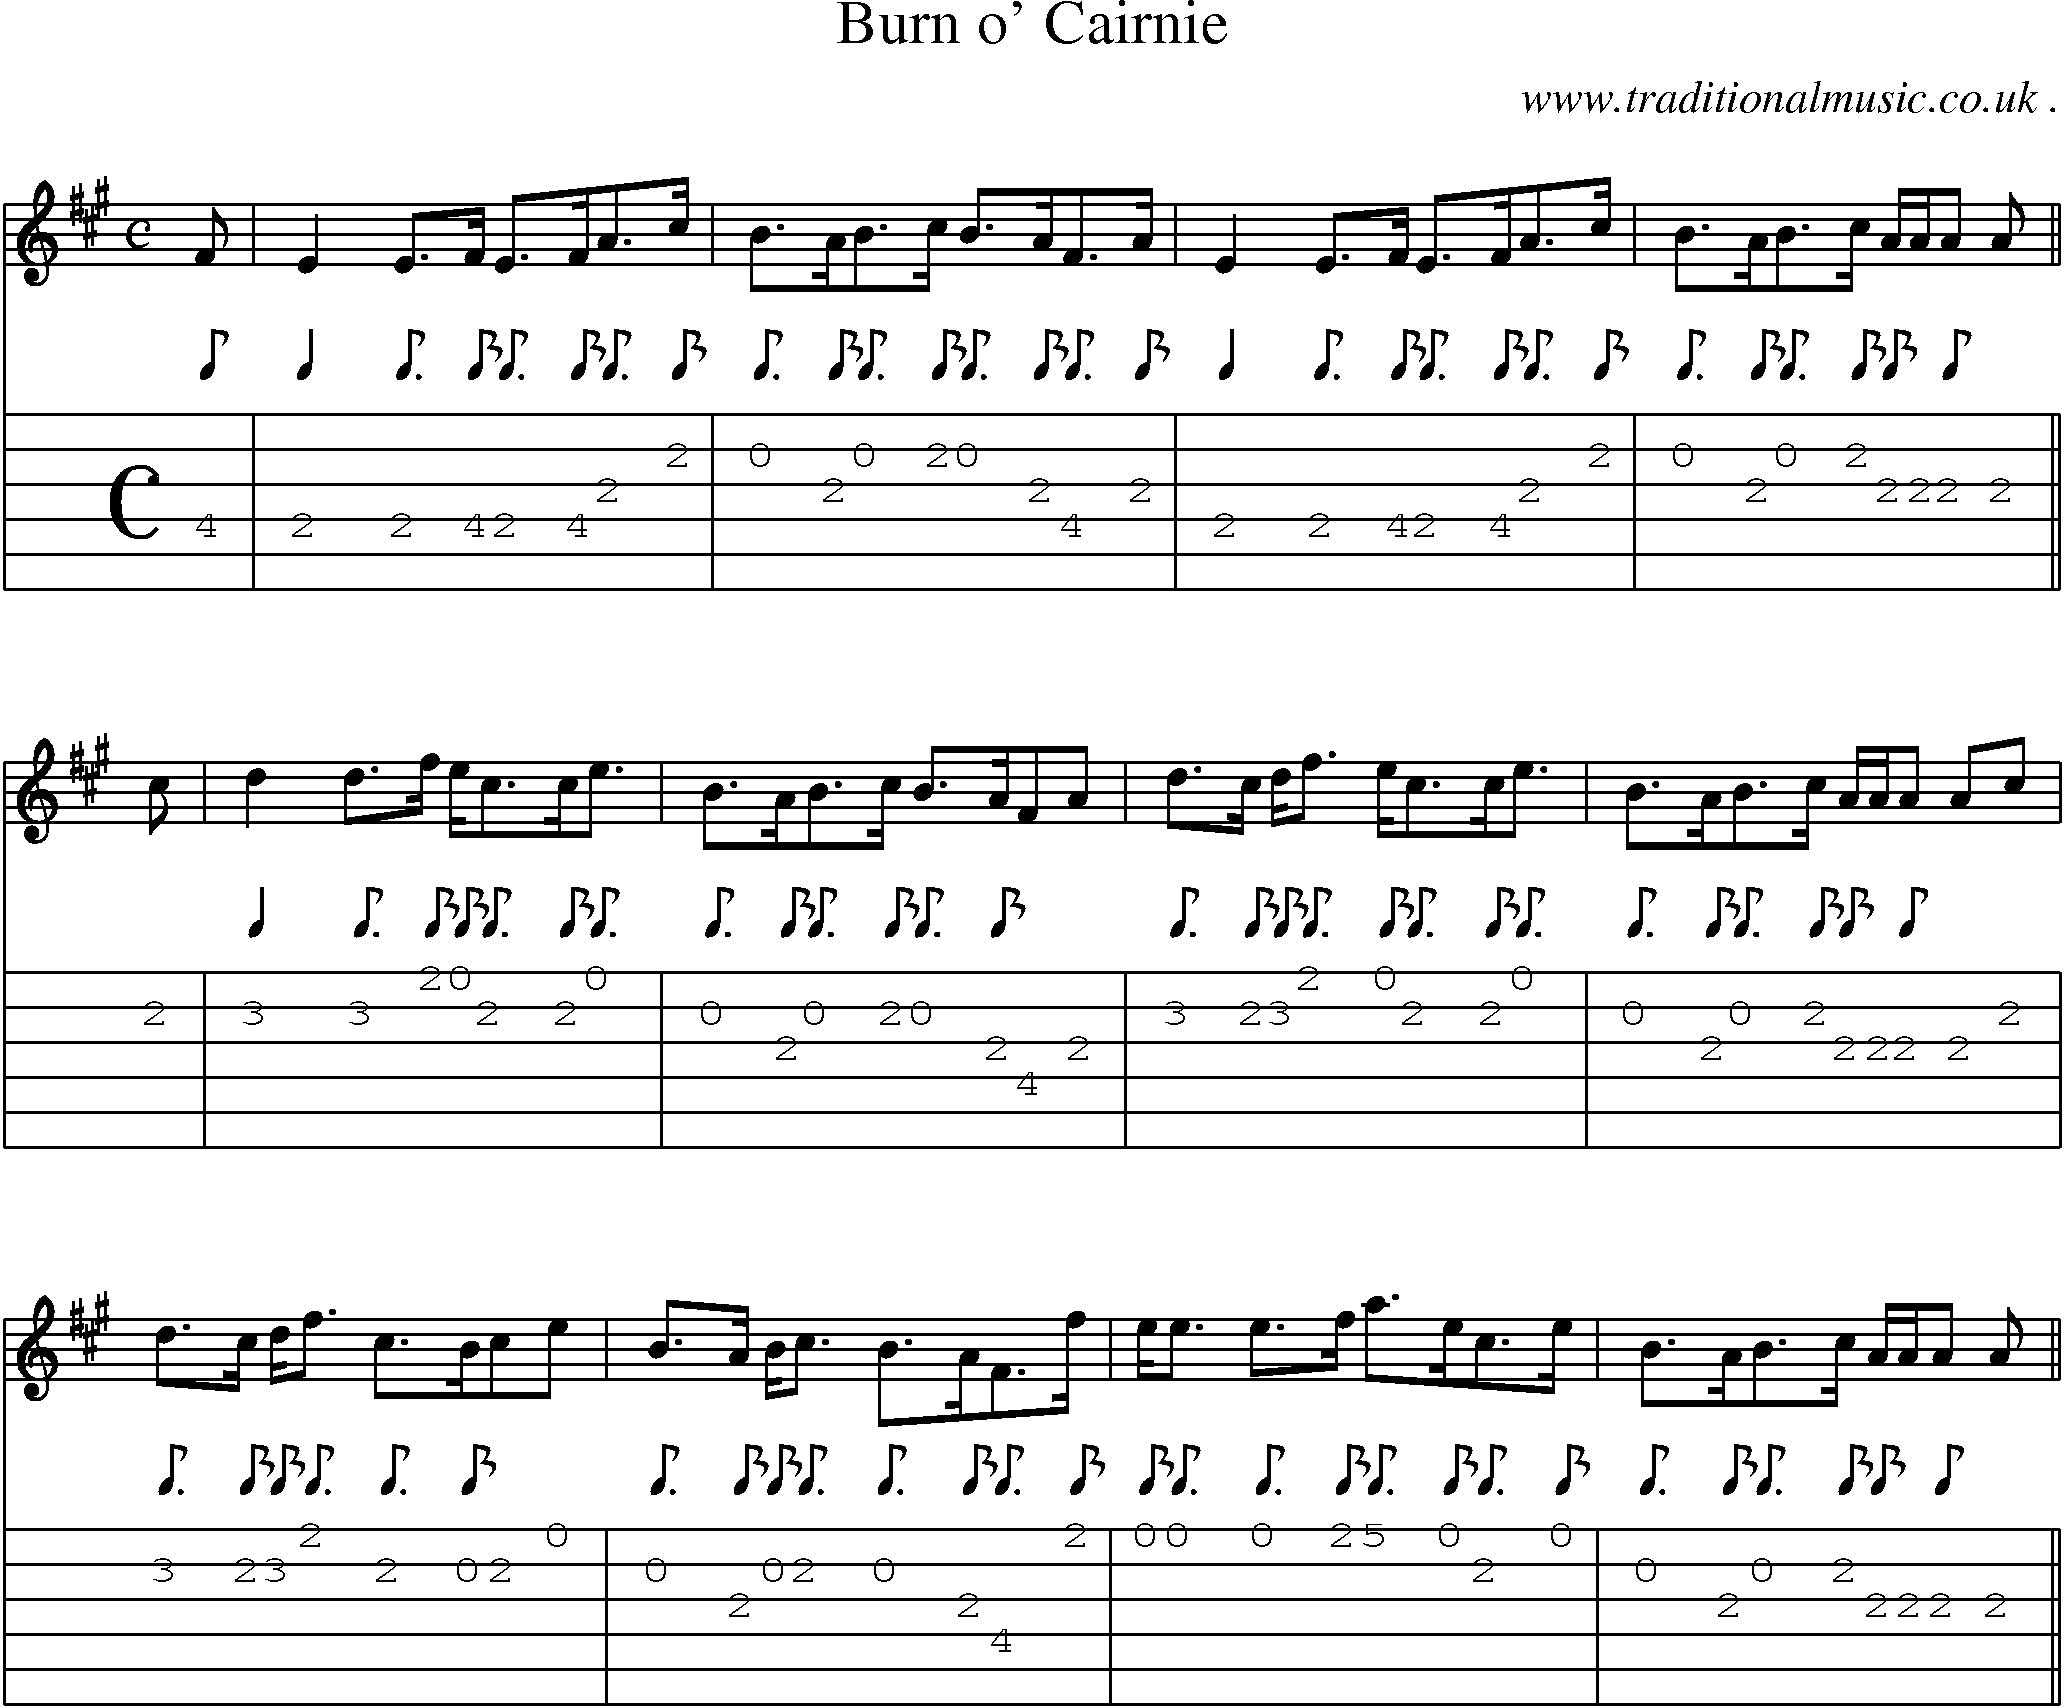 Sheet-music  score, Chords and Guitar Tabs for Burn O Cairnie